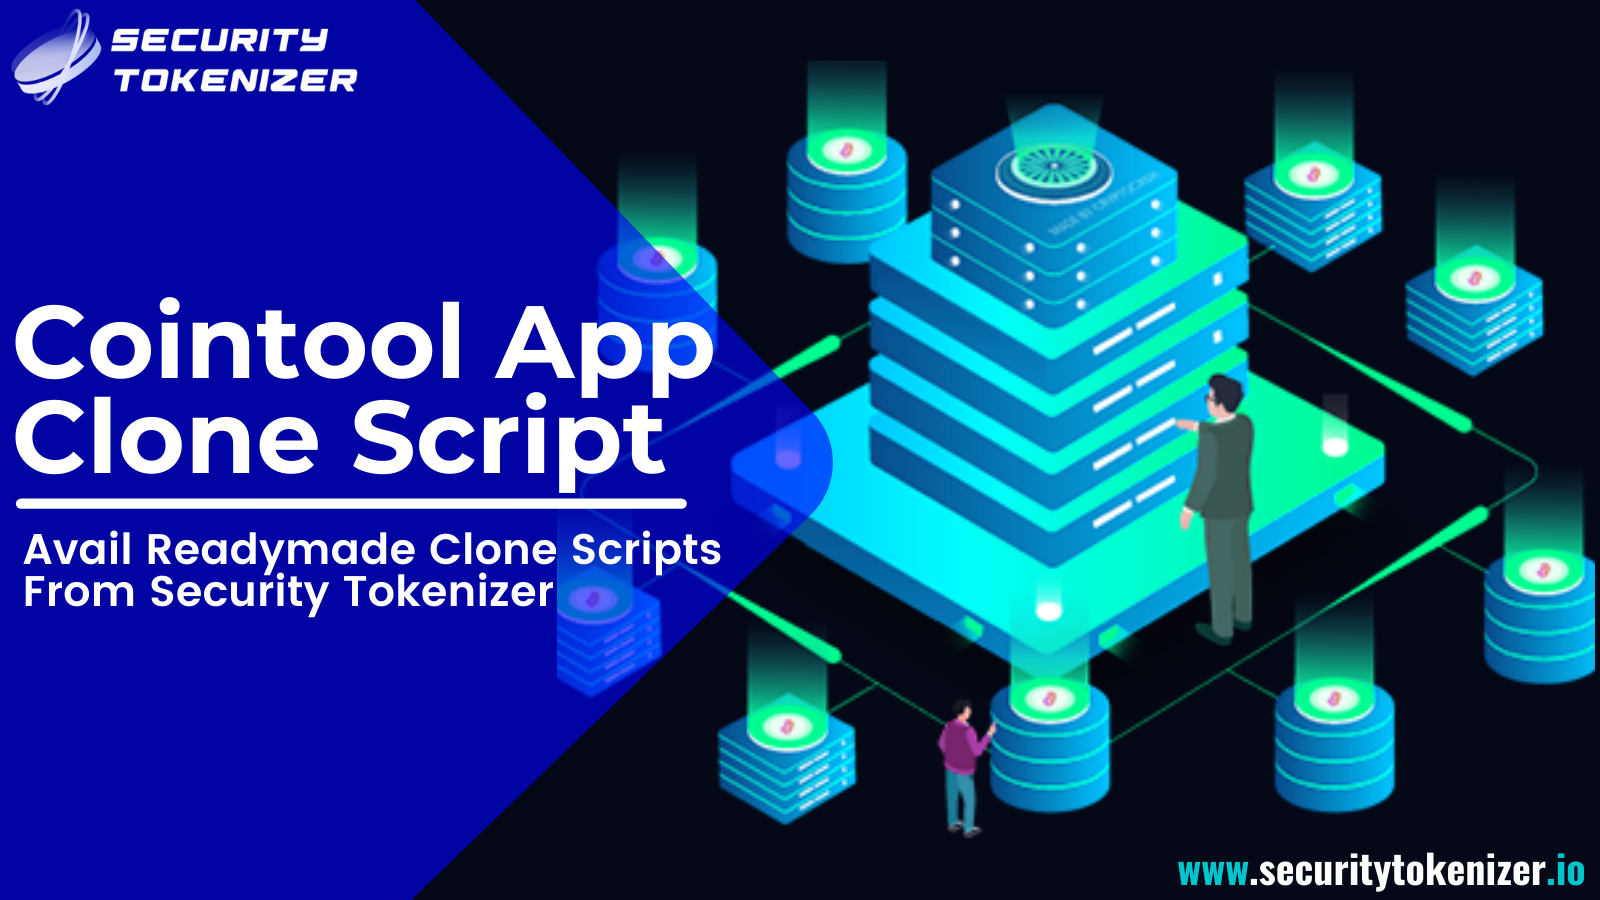 Article about Steps involved in developing a BEP20 Token Using Cointool App Clone Script